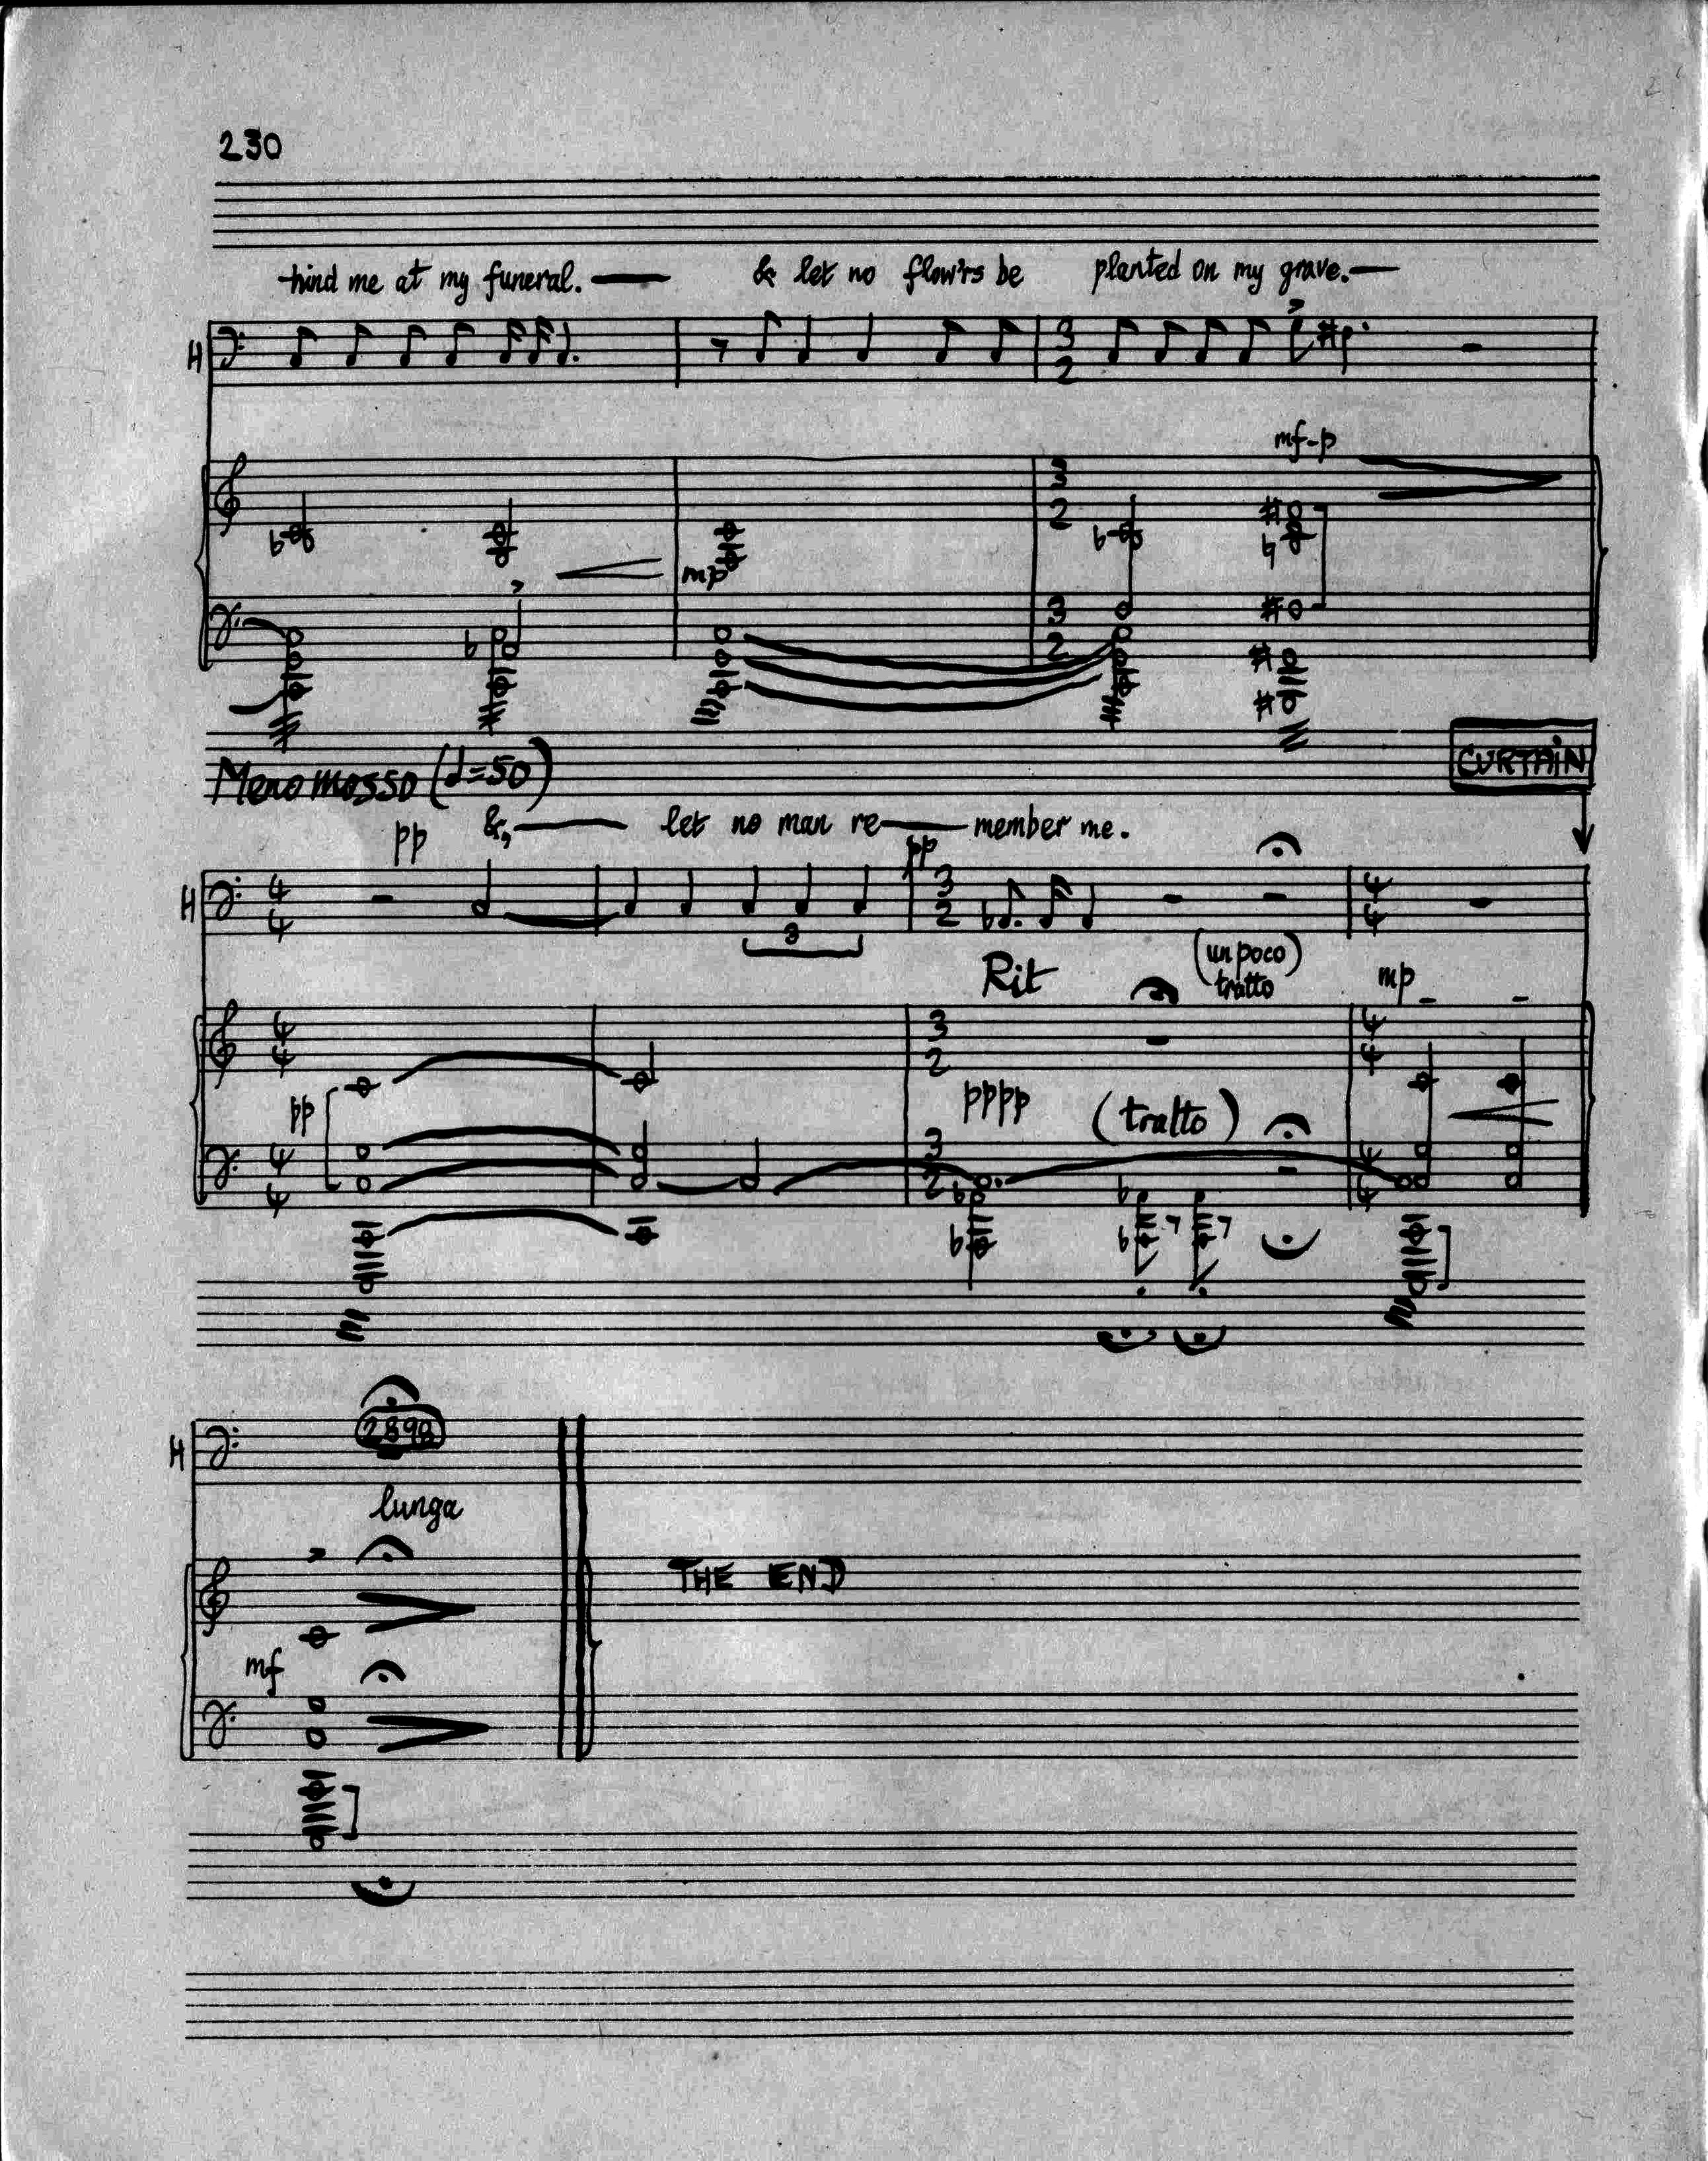 The final bars of the vocal score of The Mayor of Casterbridge, original edition, 1951